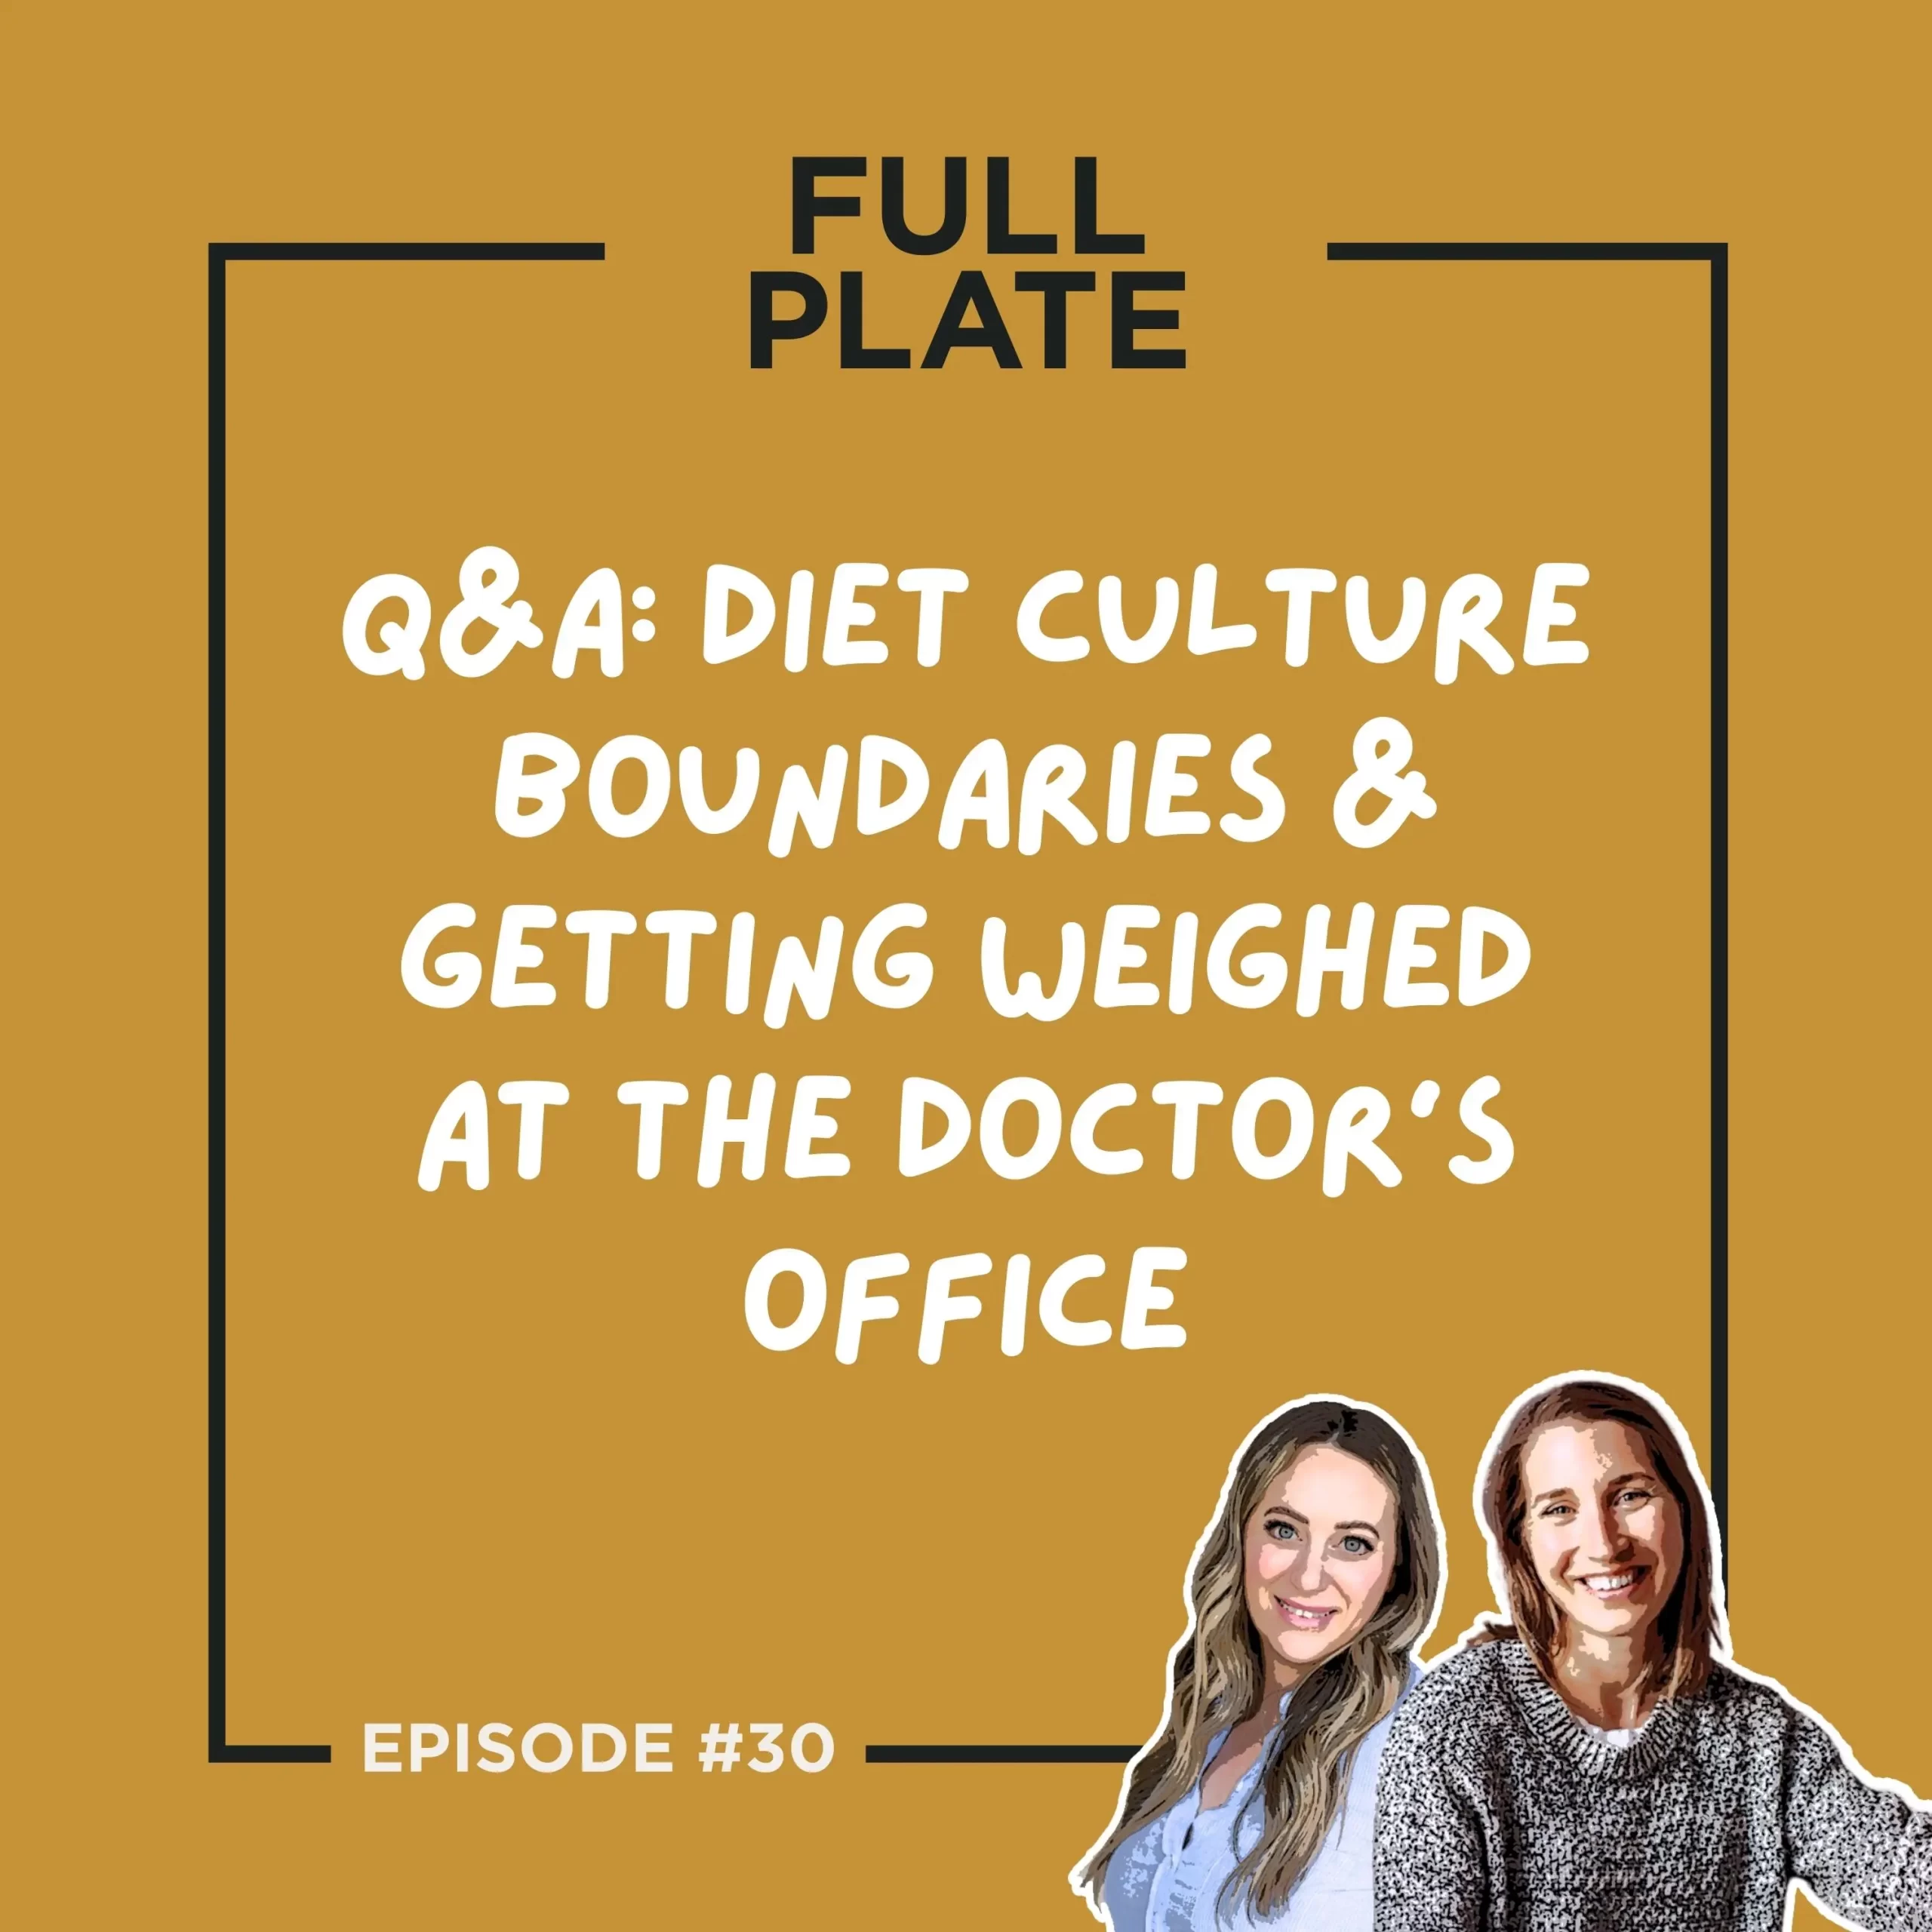 Full Plate Podcast | Ditch diet culture, respect your body, and set boundaries | Episode 30: Listener Q&A - Diet Culture Boundaries & Getting Weighed at the Doctor’s Office